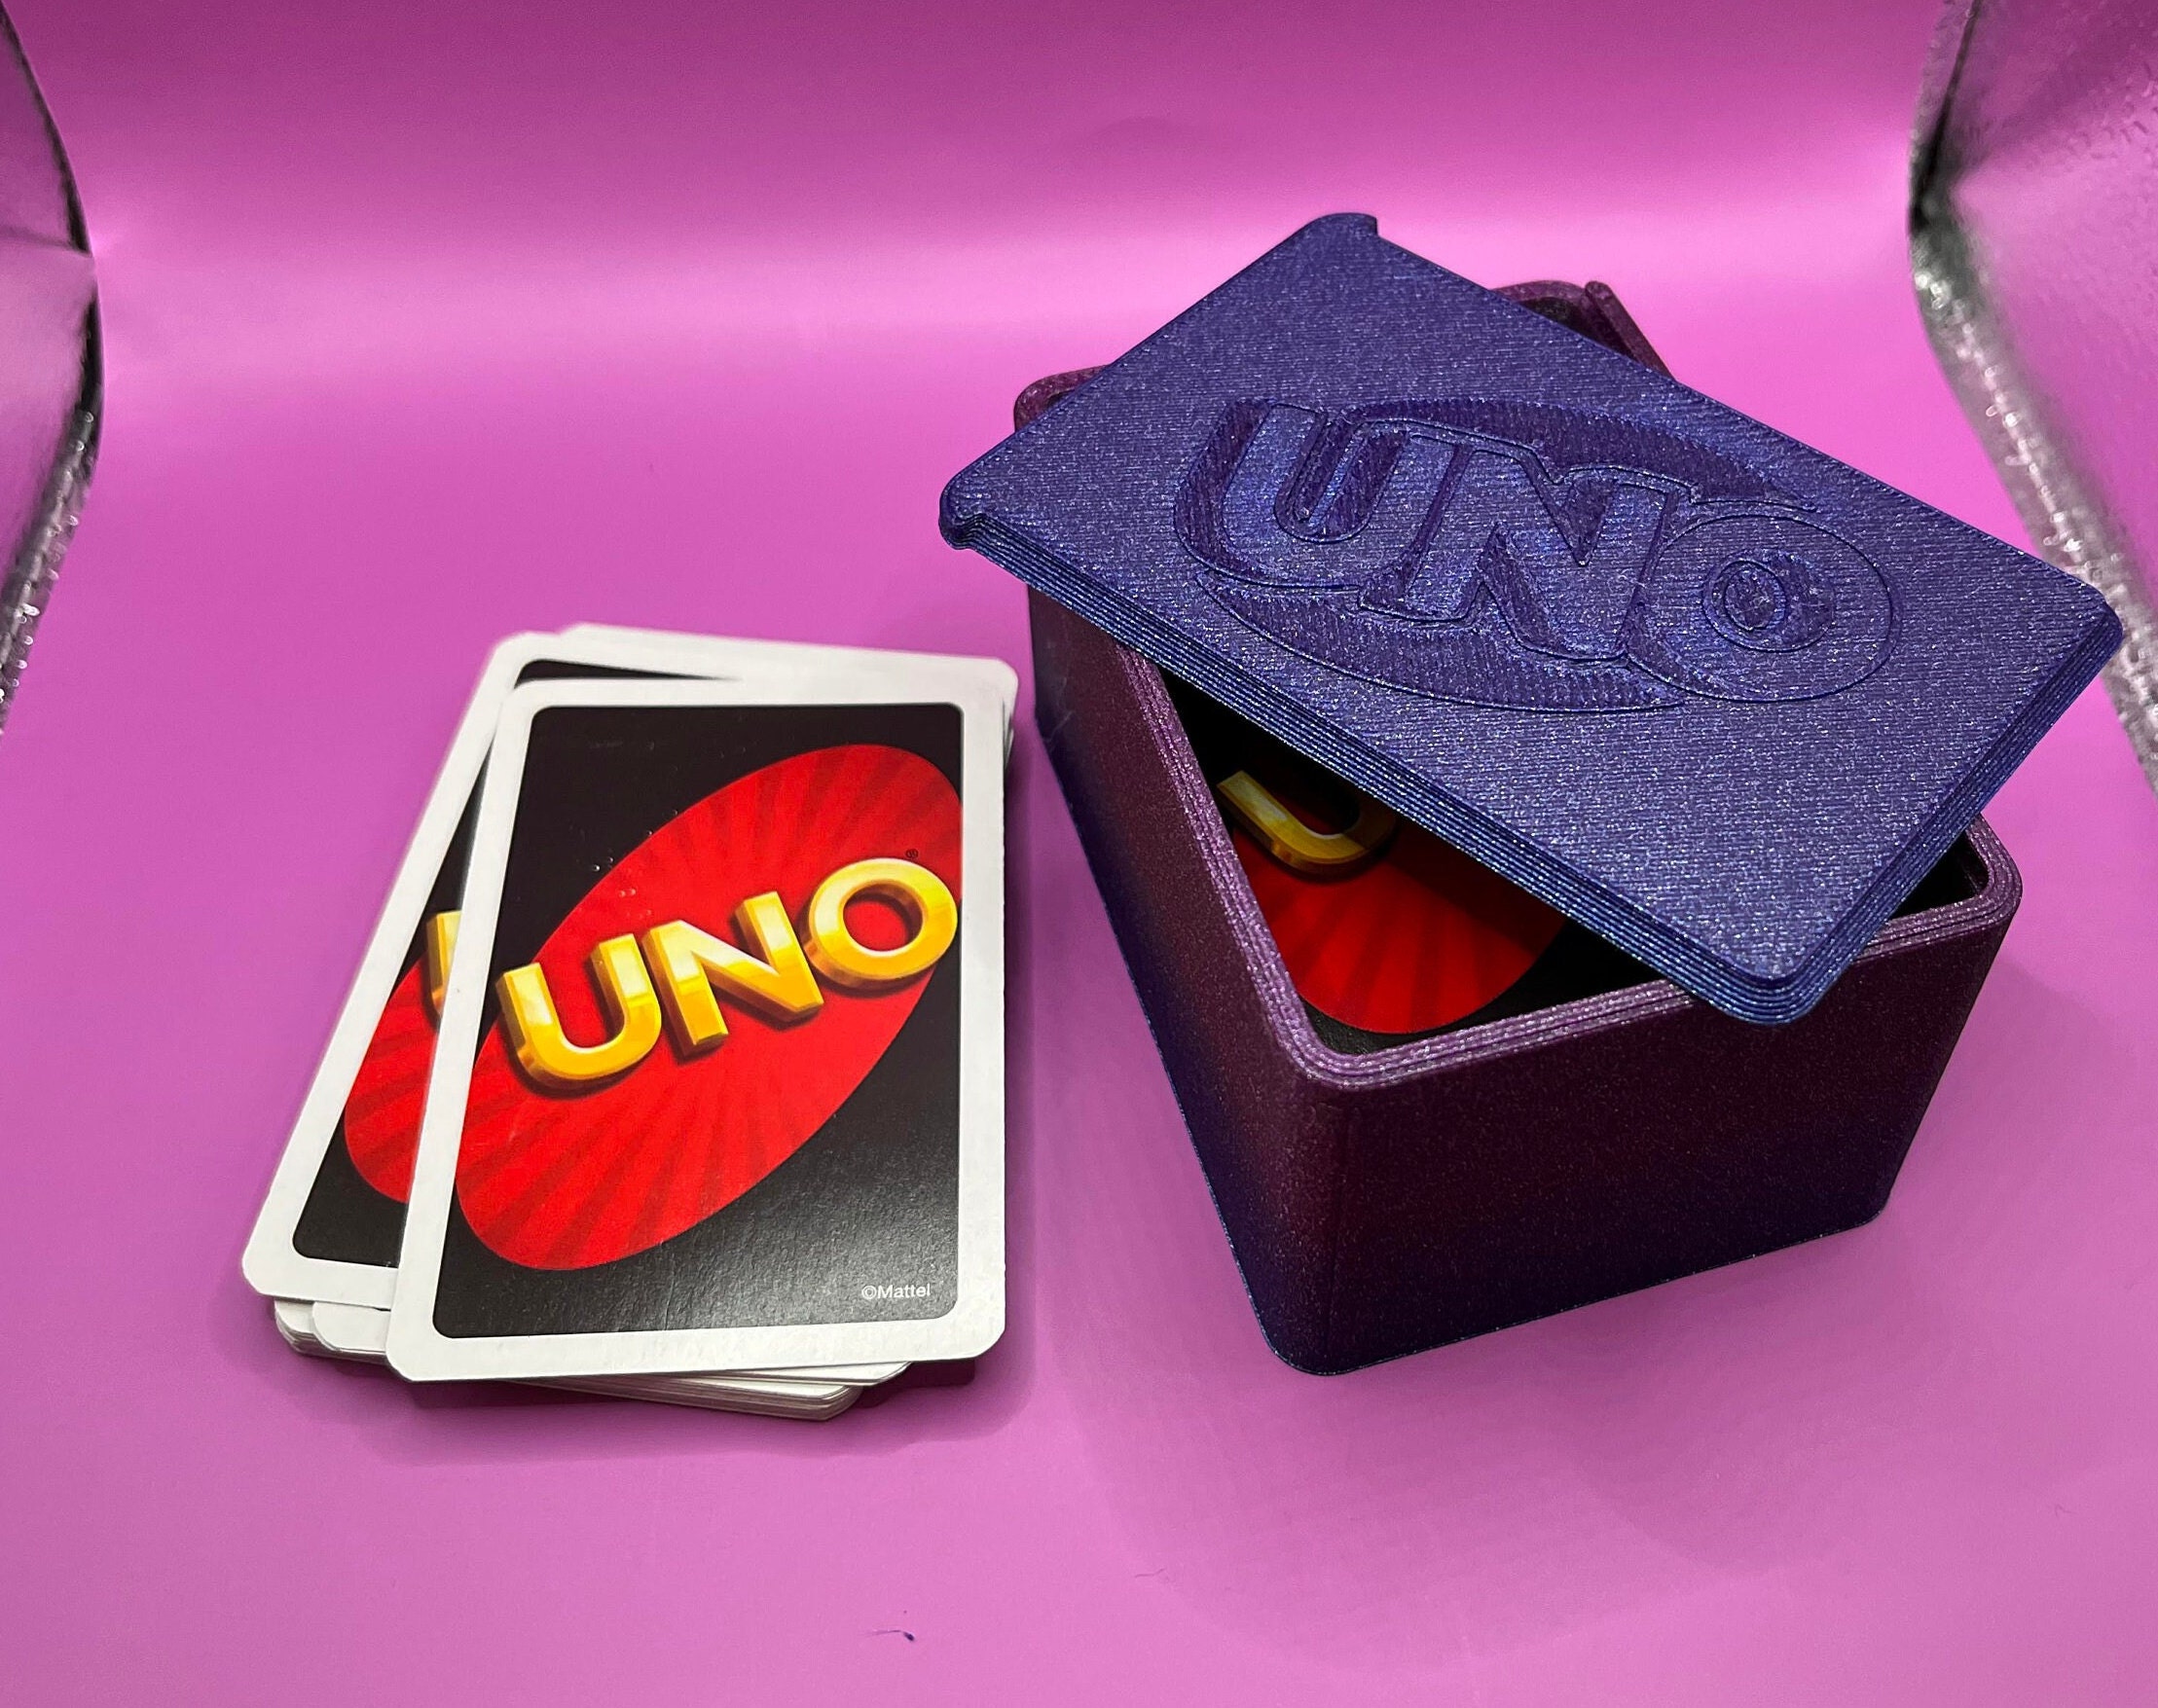 4pcs Plastic Uno Card Case Box Holder Designed for 112pcs Classic Mattel Uno Card Game, High Capacity Playing Card Case Box Storage (No Cards)